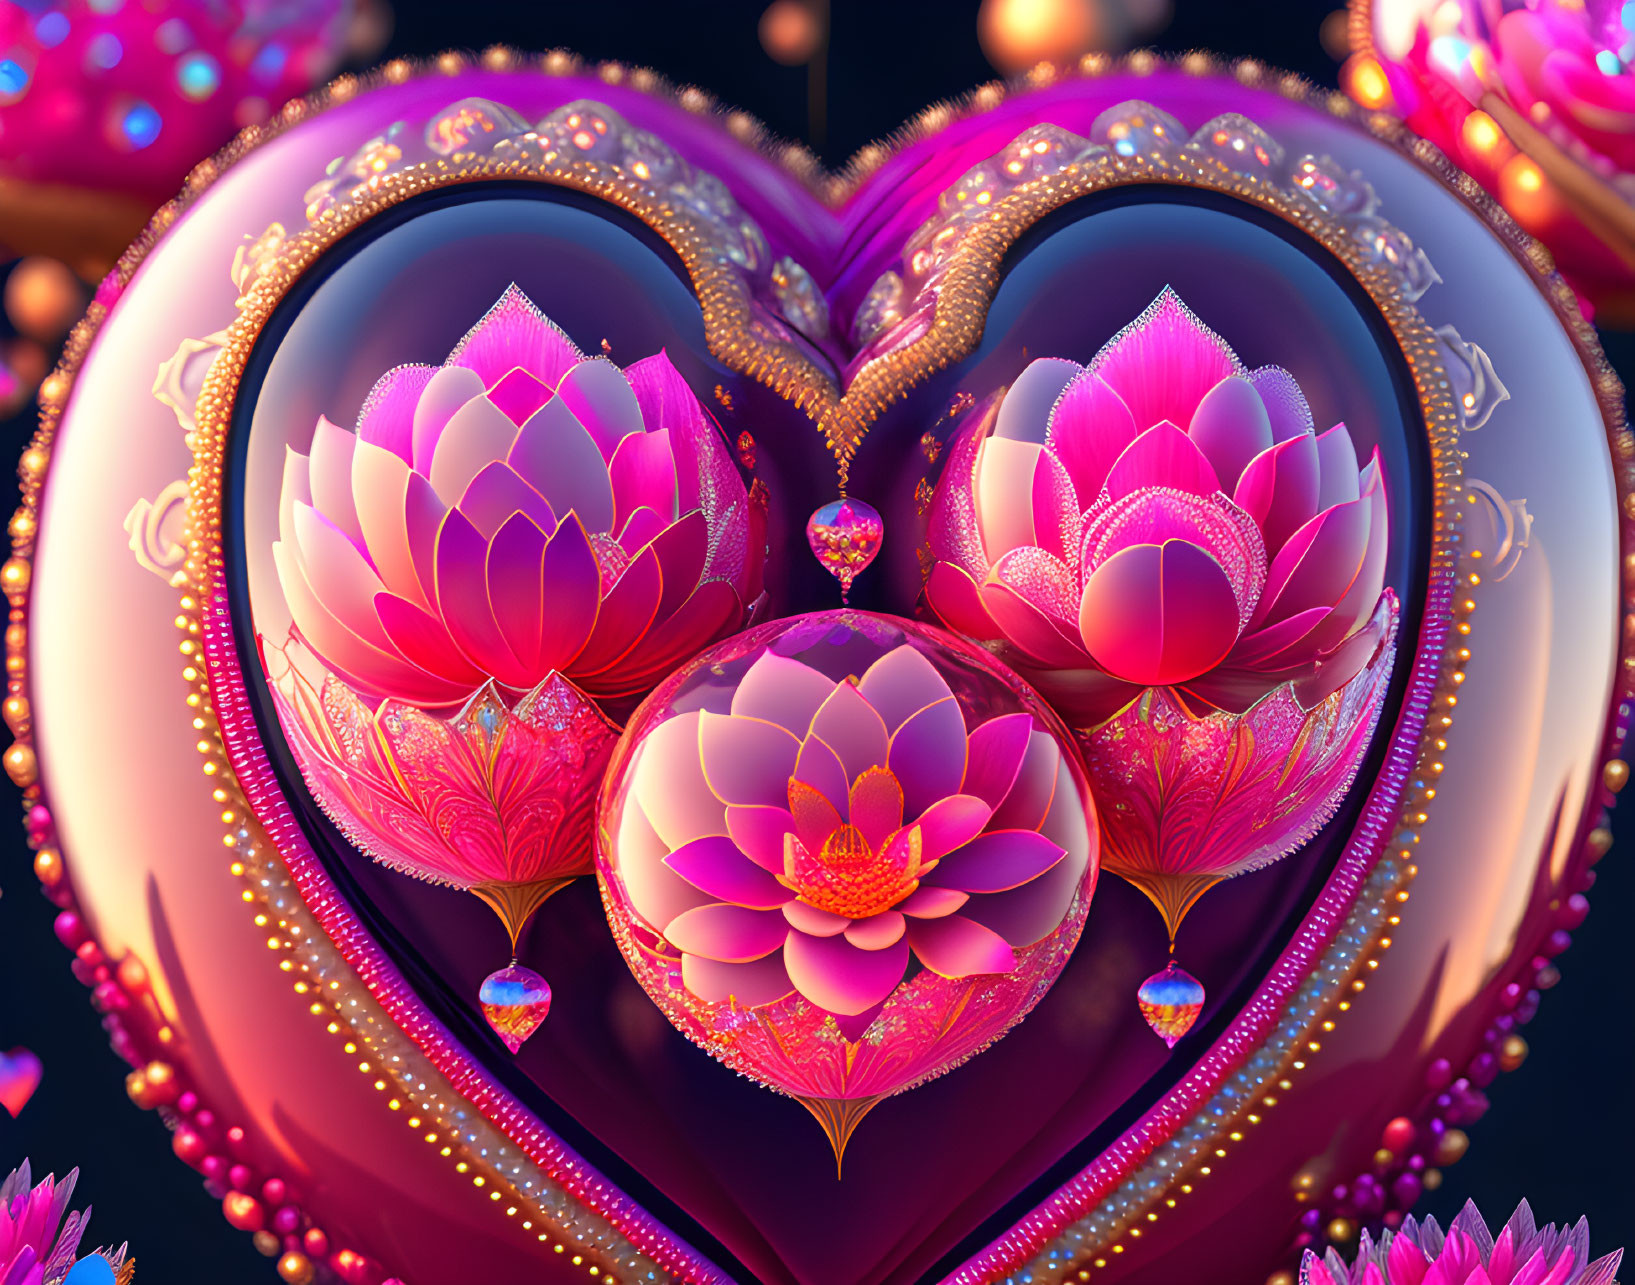 Colorful 3D Heart Frame with Lotus Flowers on Dark Background